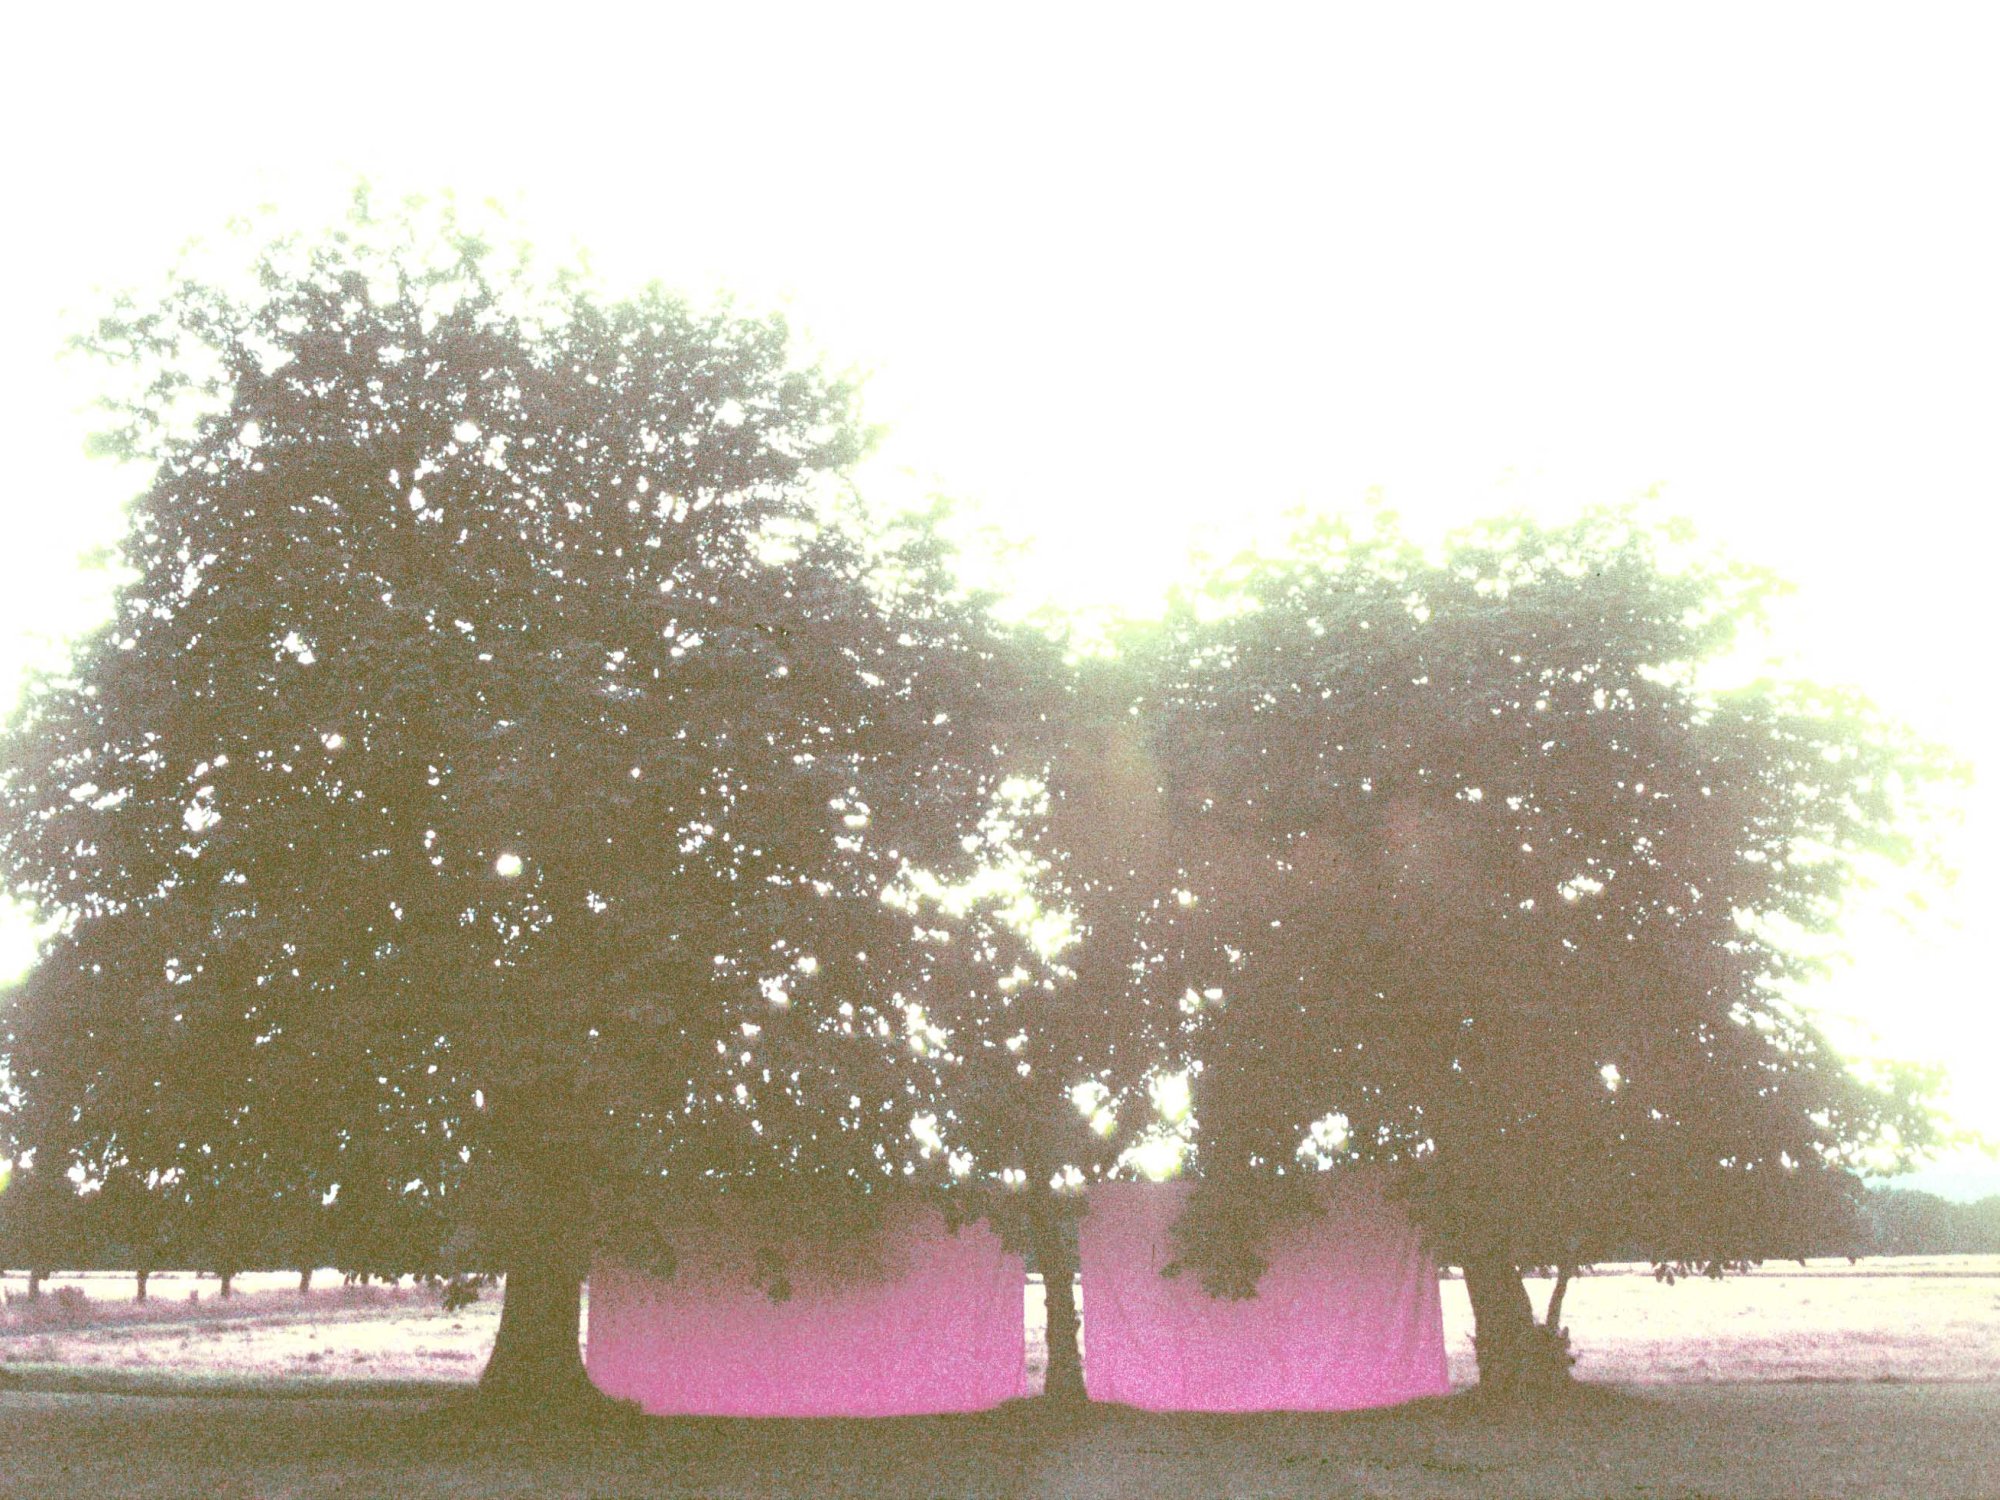 'Energy Field' 1998- 2002 by artist Wendy Hardie. Two walls of pink fabric drawn tight between 3 Chestnut trees. Sited on the farm Hardie grew up on these trees were planted by her grandfather and his two brothers.